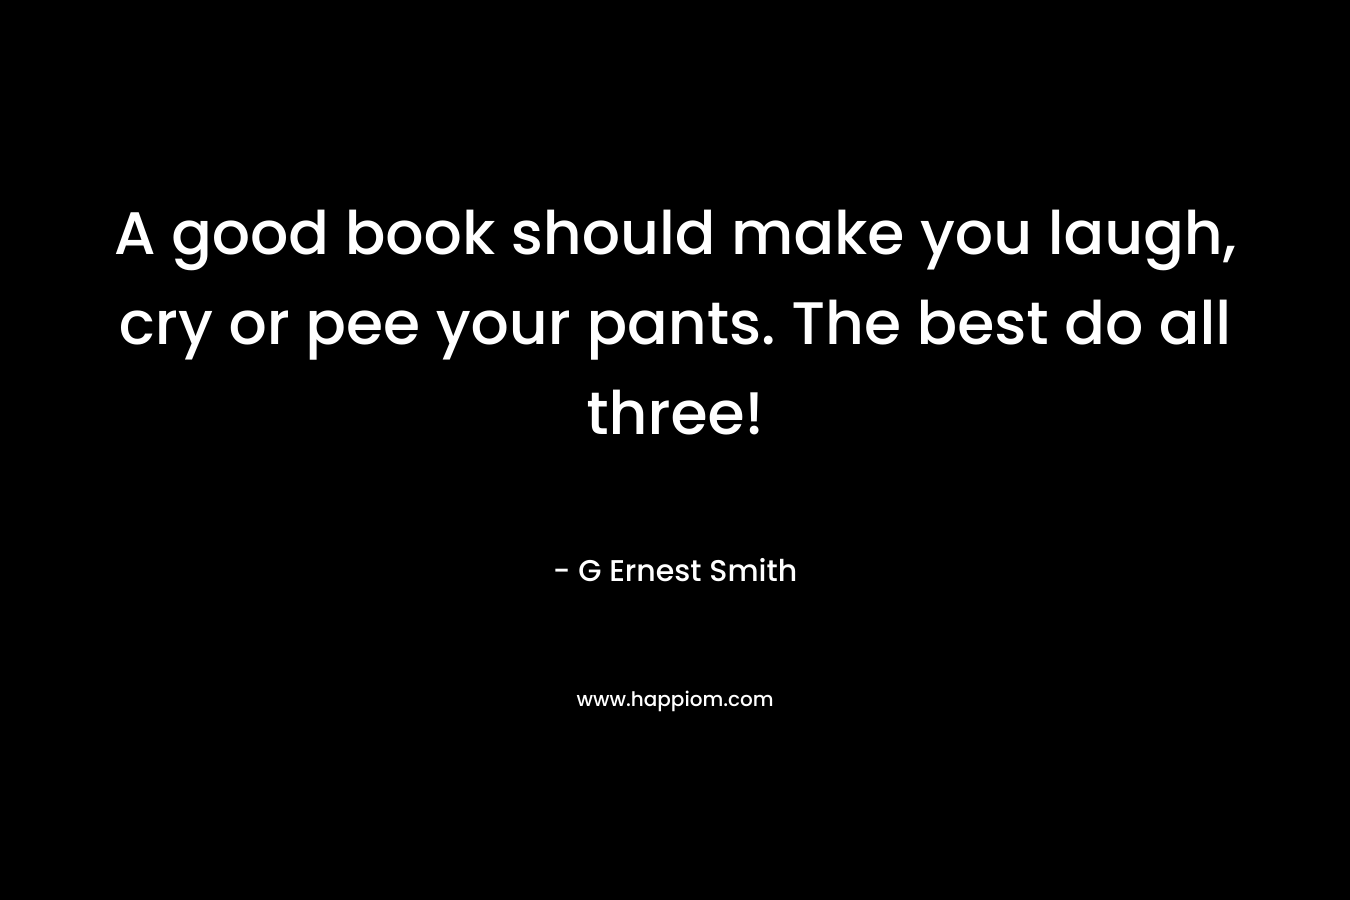 A good book should make you laugh, cry or pee your pants. The best do all three! – G Ernest Smith